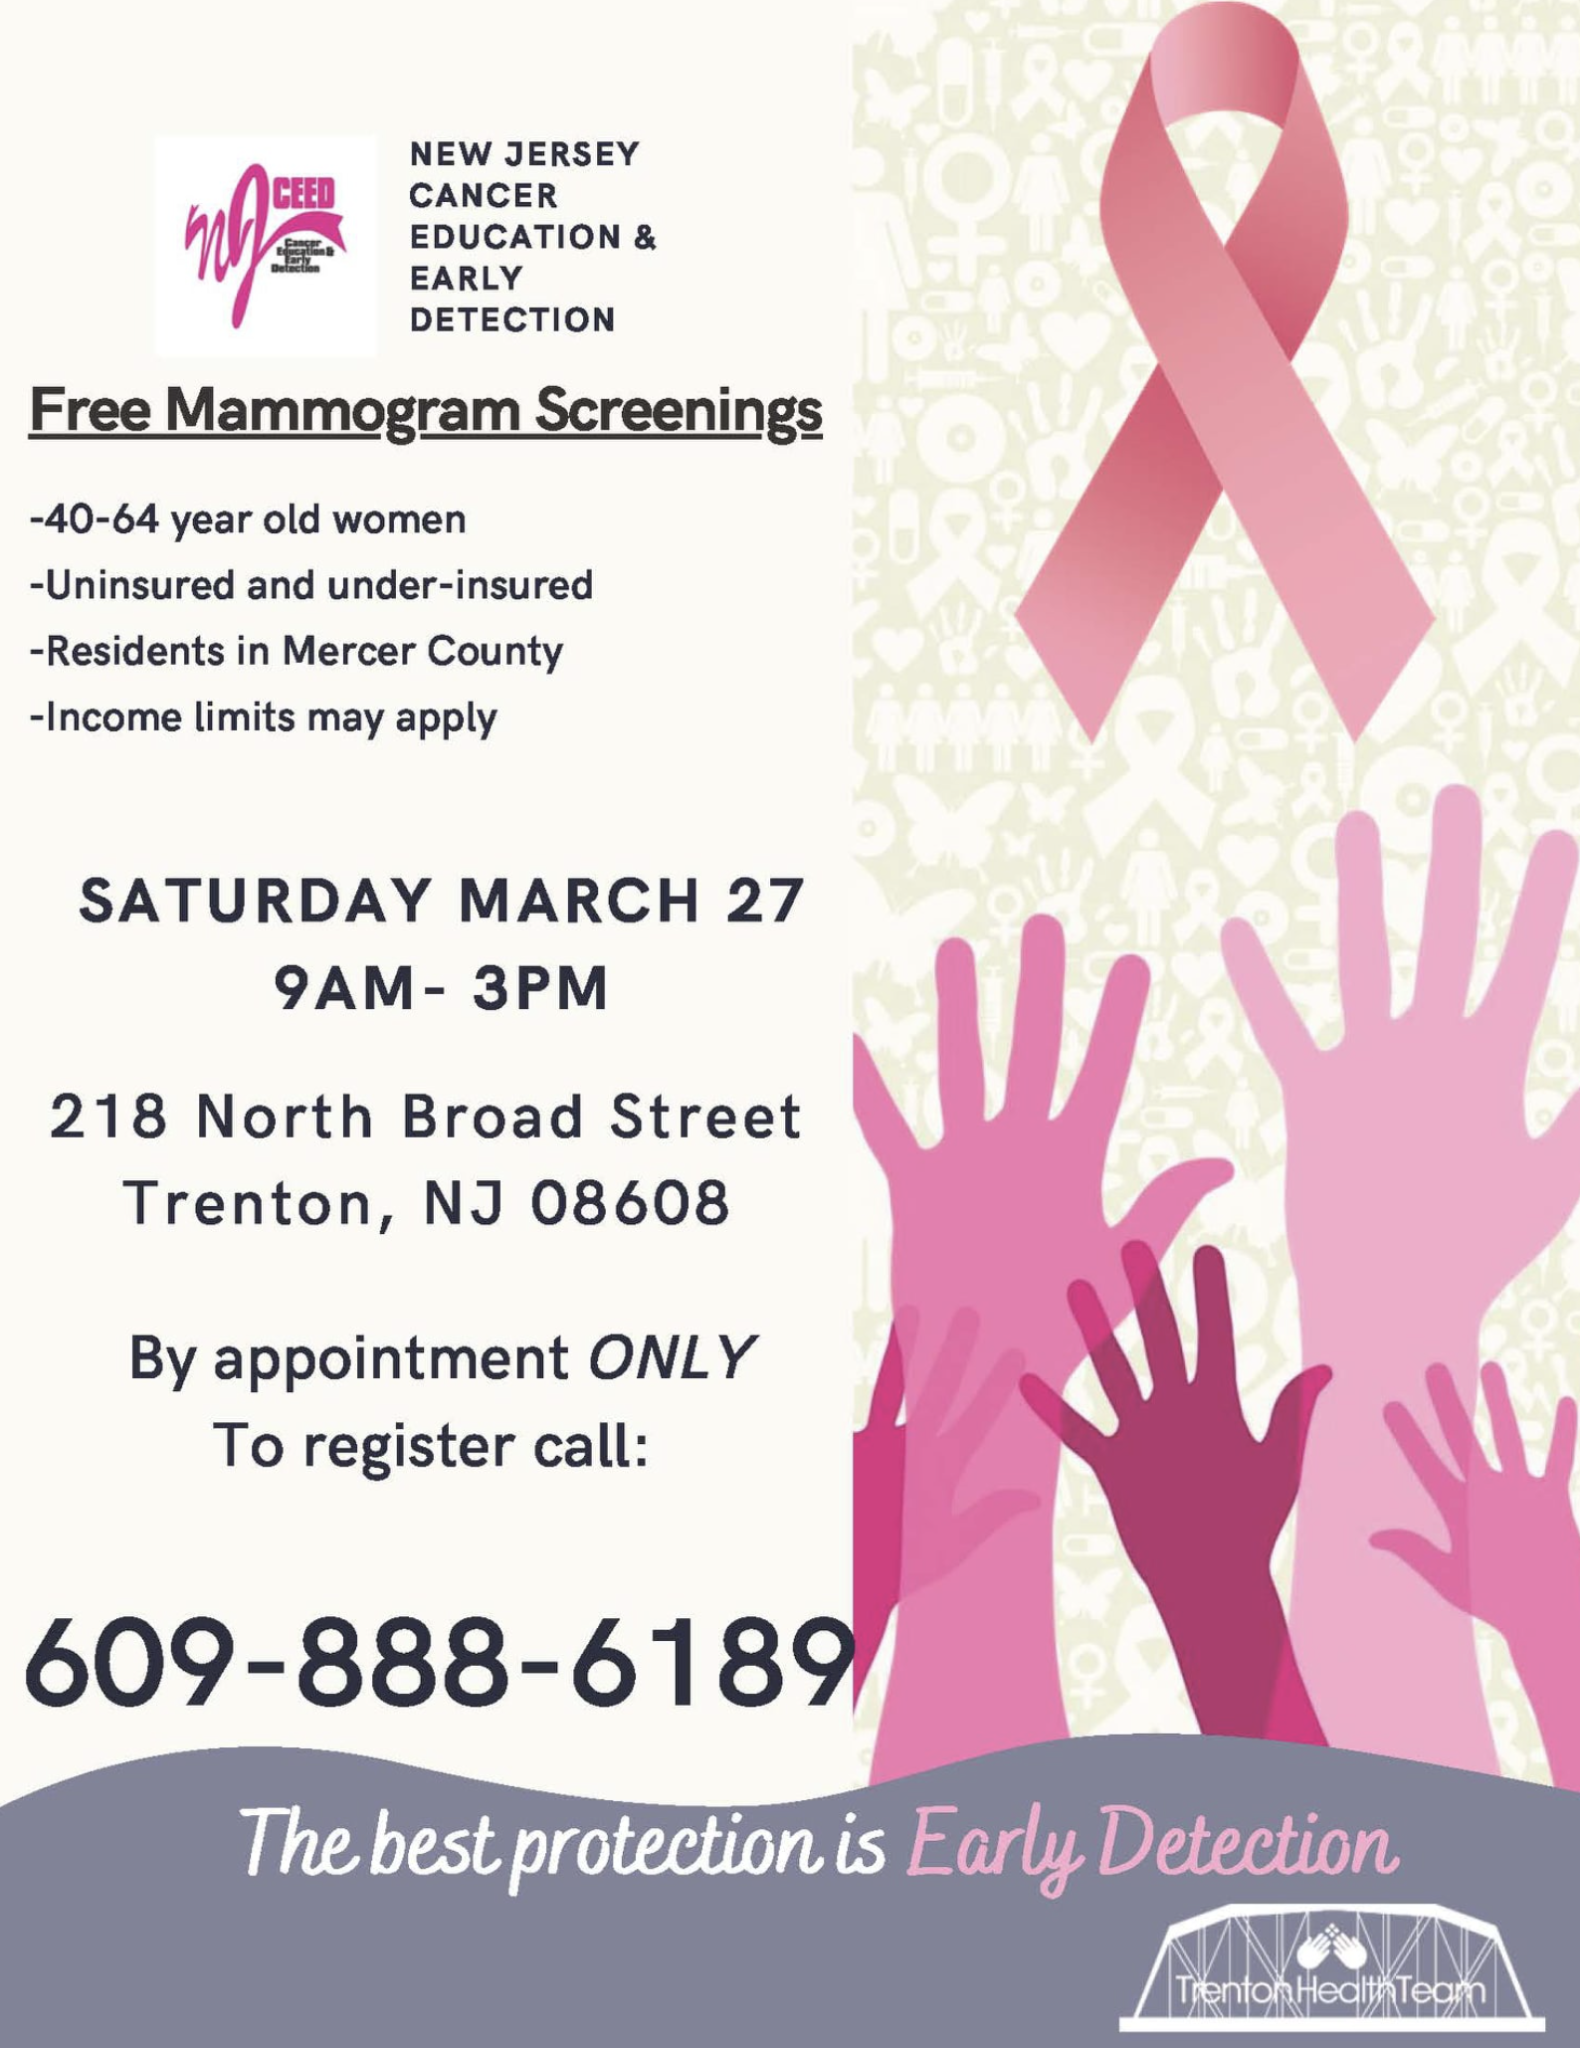 THT Offers Free Cancer Screenings in Support of Early Detection ...